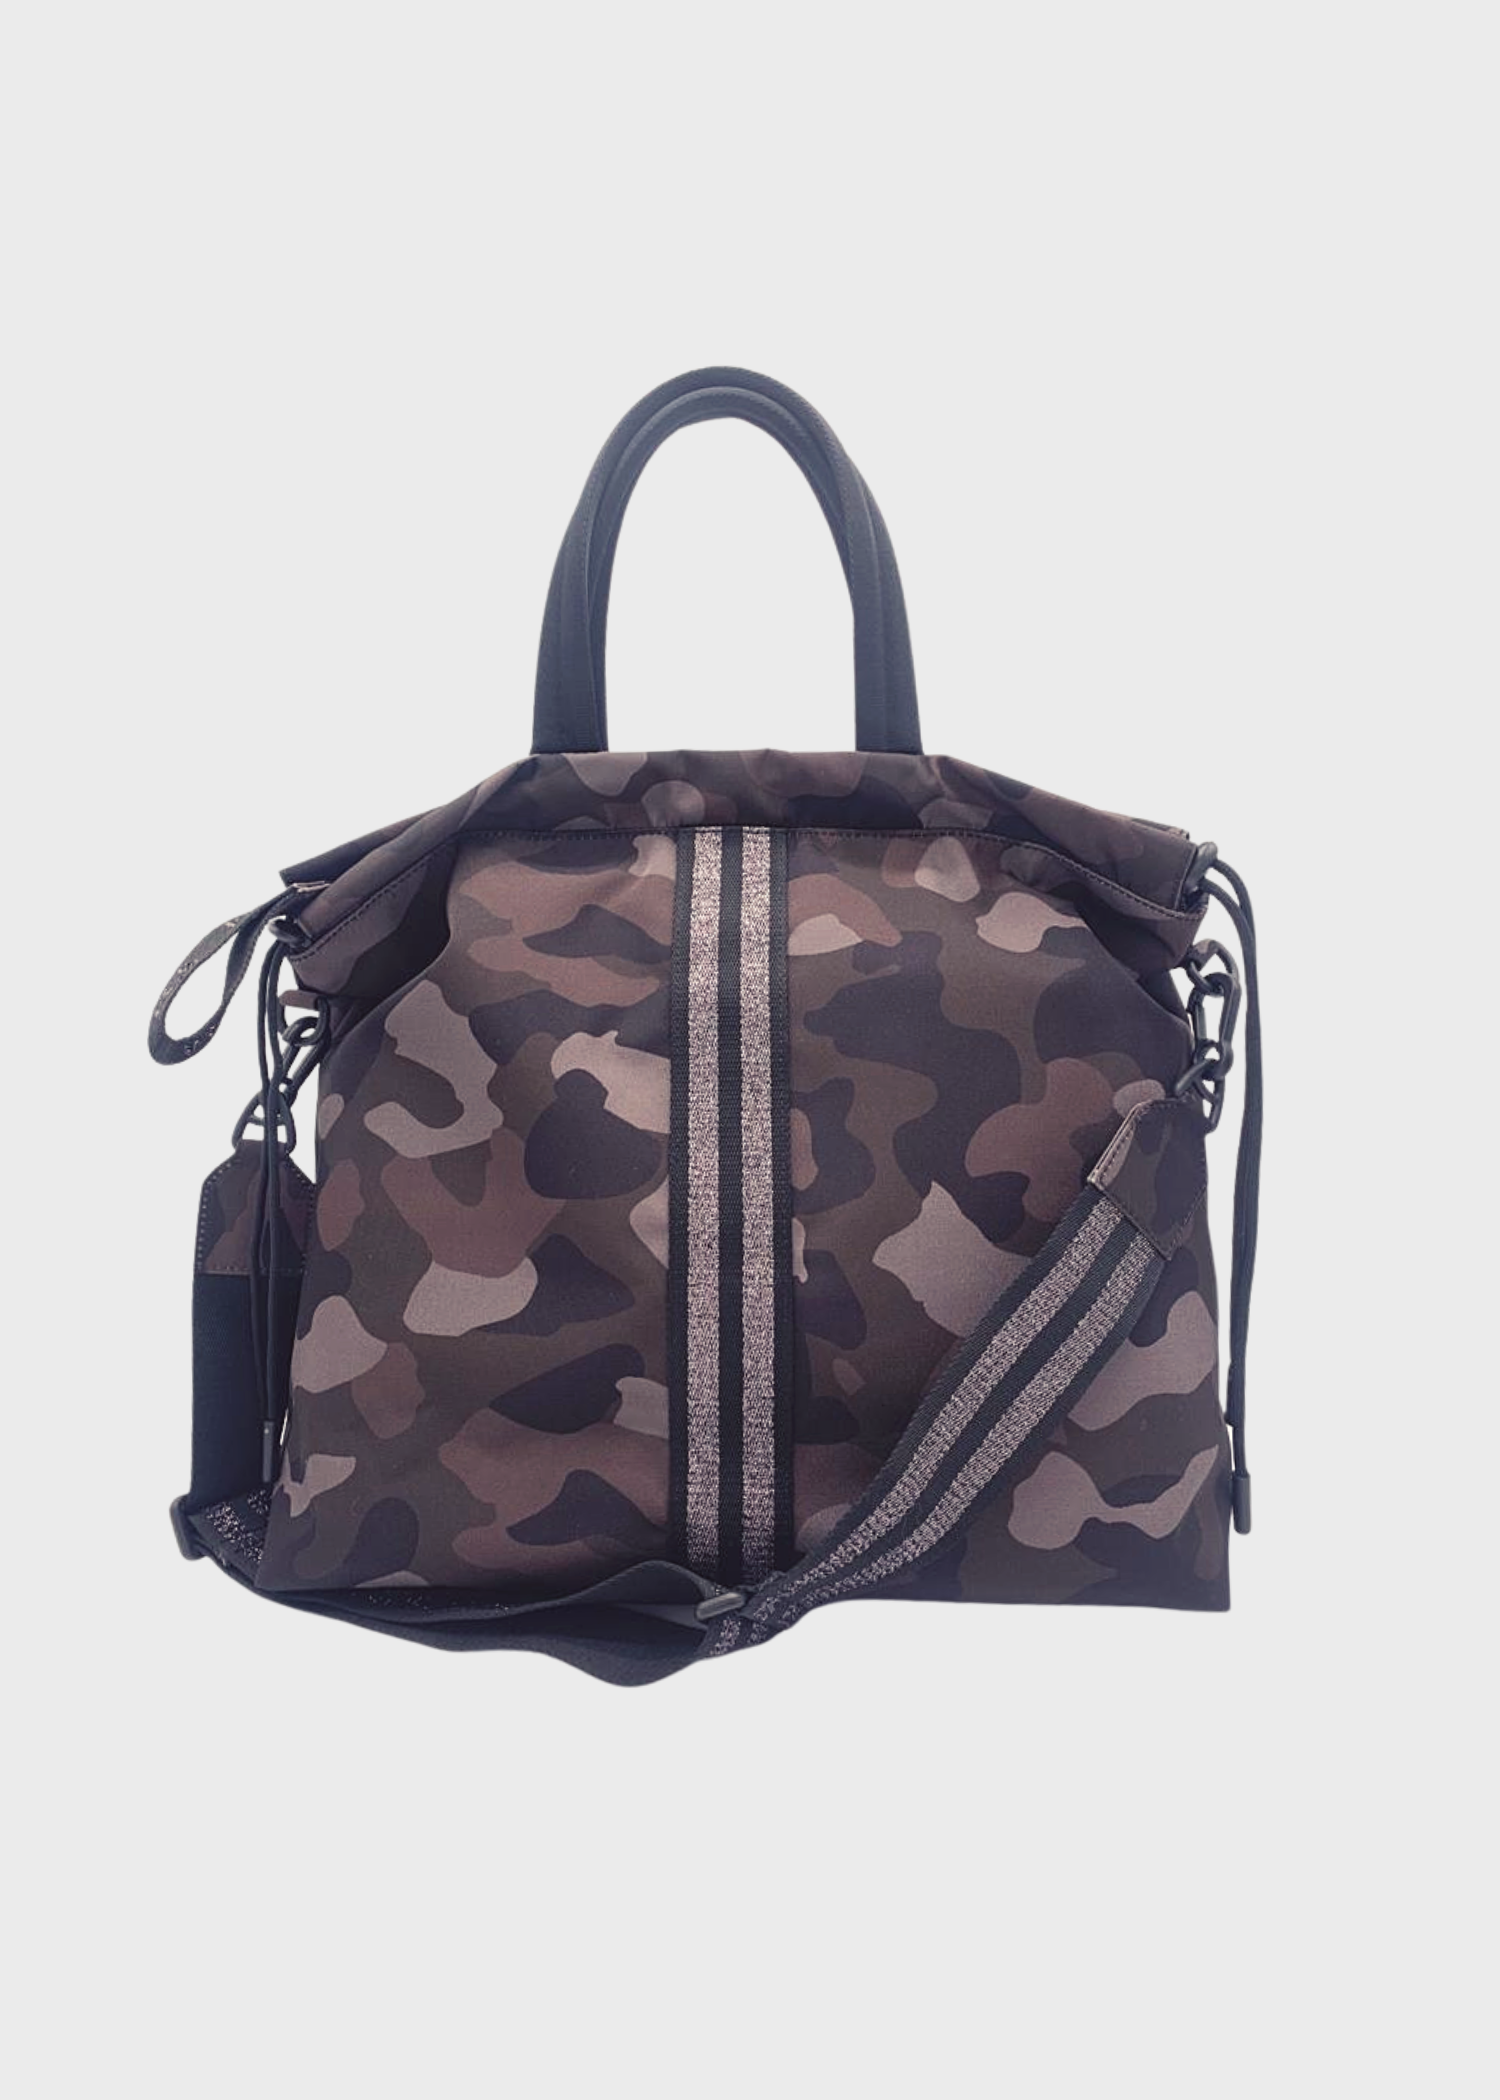 ACE Tote Bag Camouflage